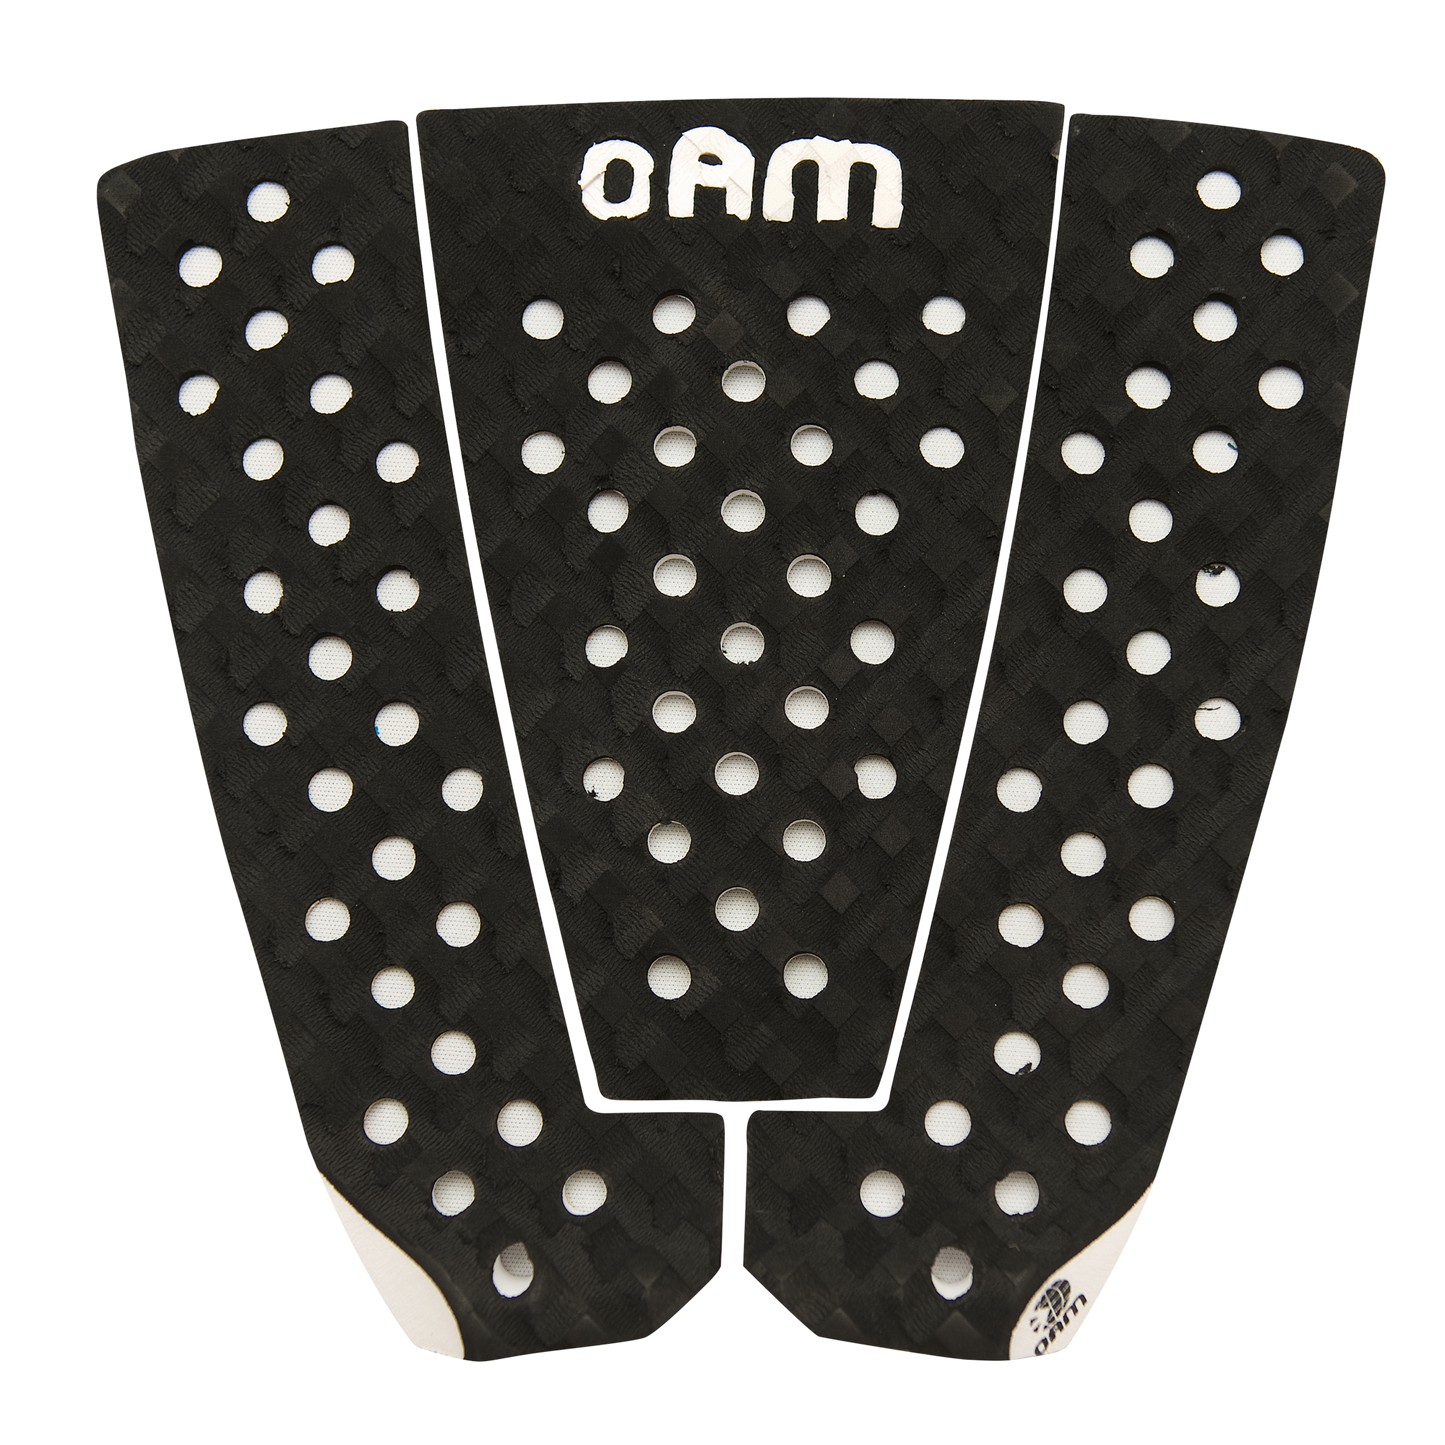 Solid Series Black Traction Grip Pad